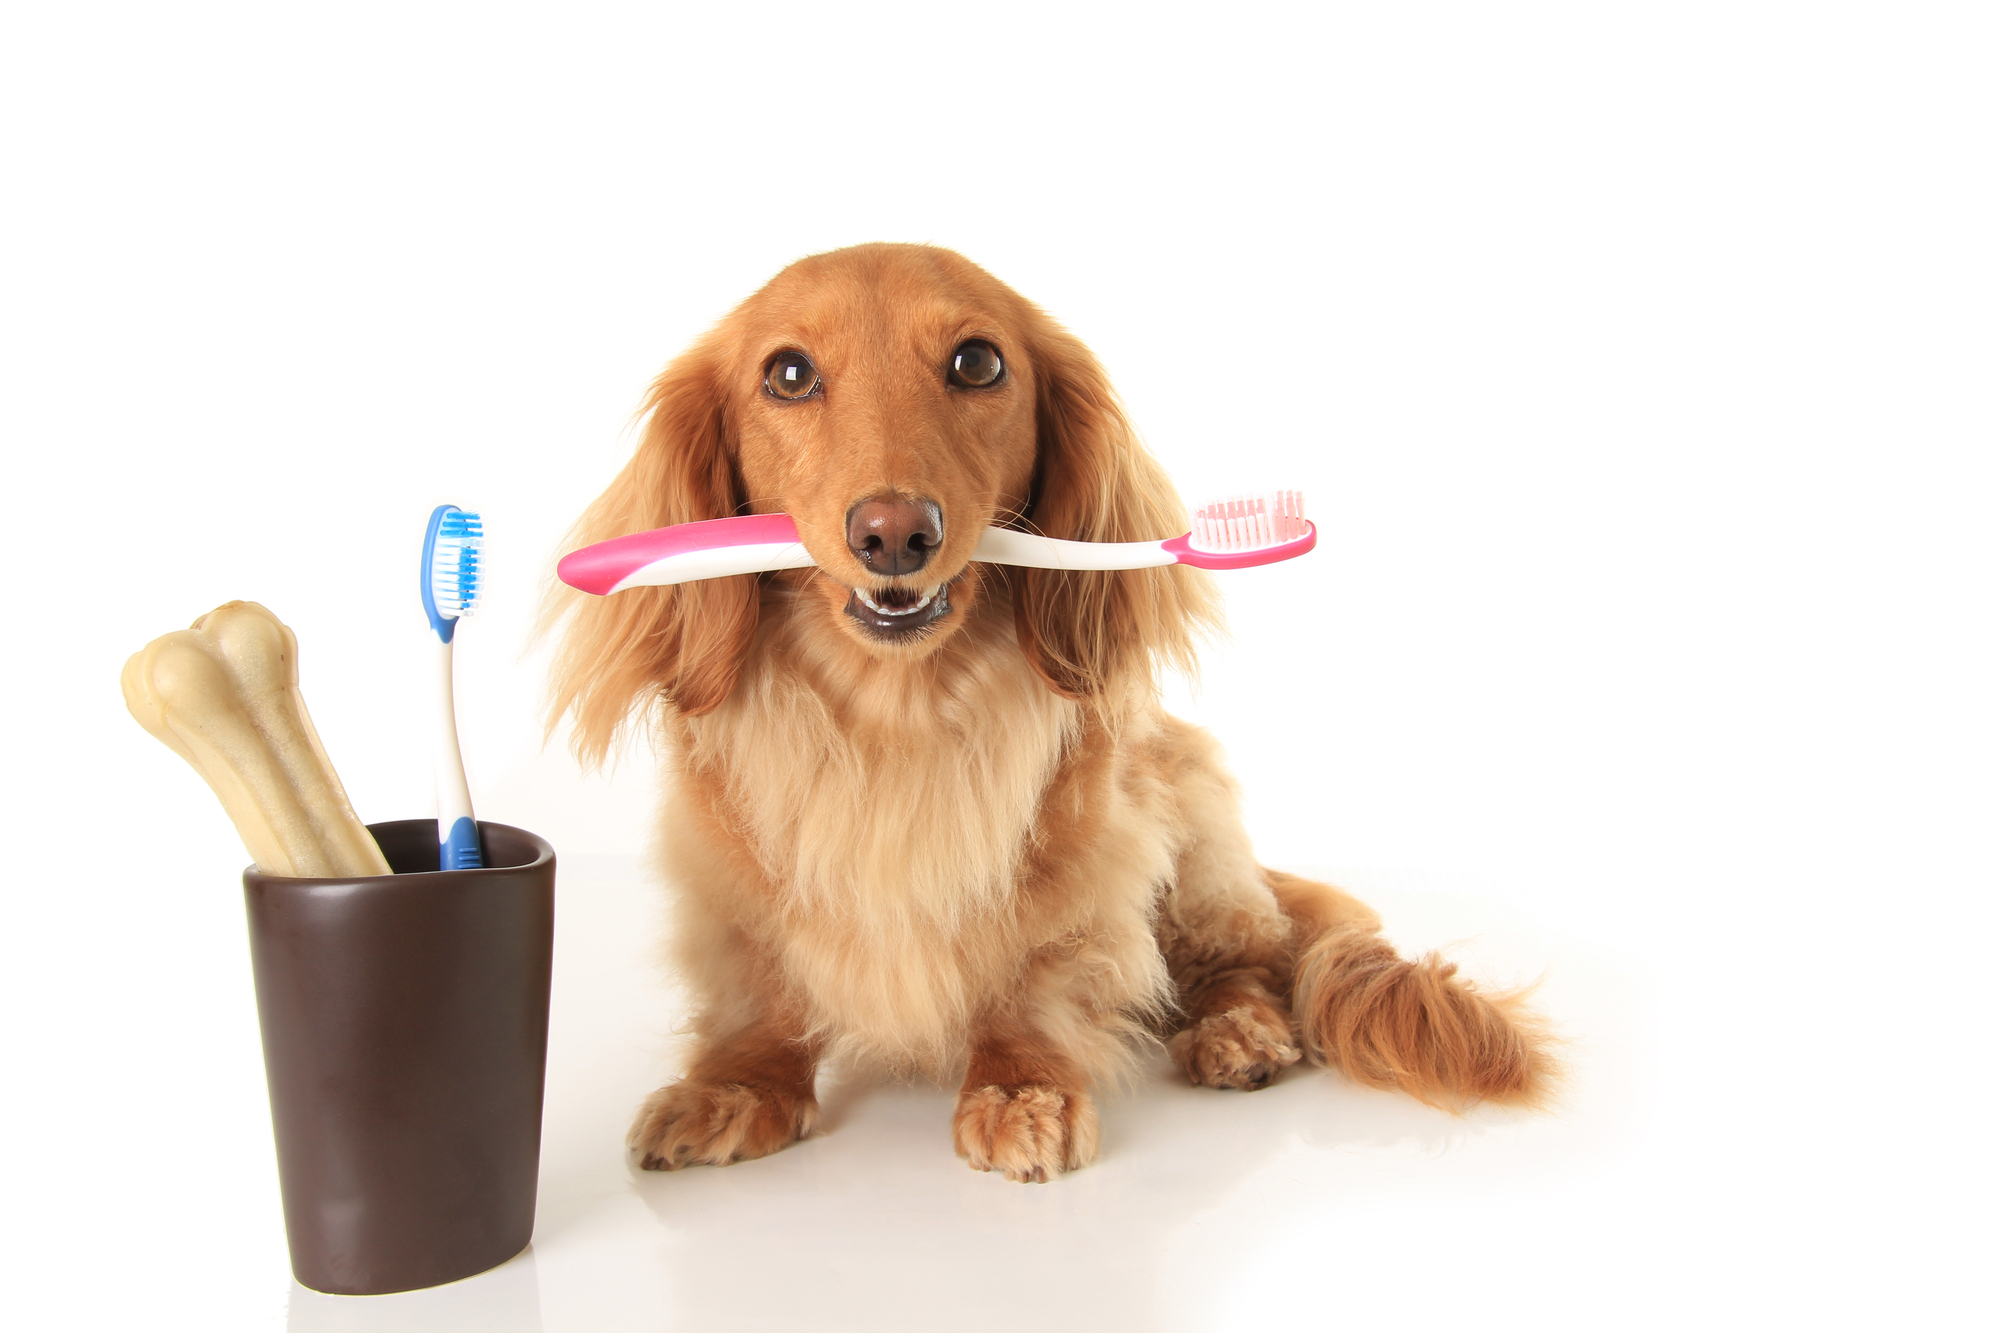 Dog holding a toothbrush in its mouth.